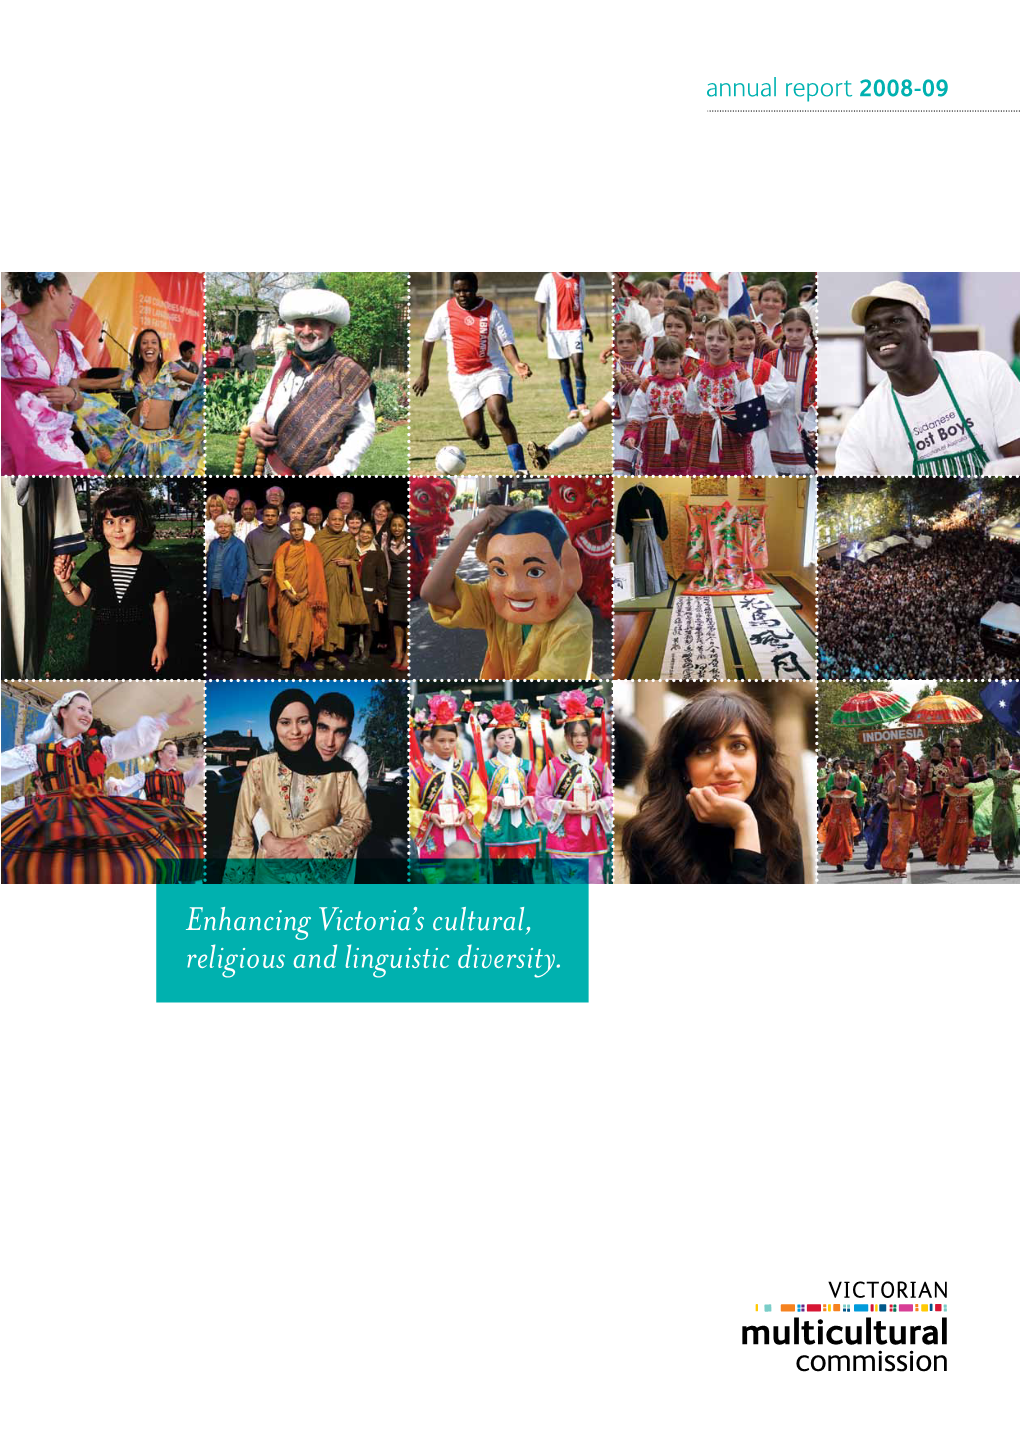 Enhancing Victoria's Cultural, Religious and Linguistic Diversity